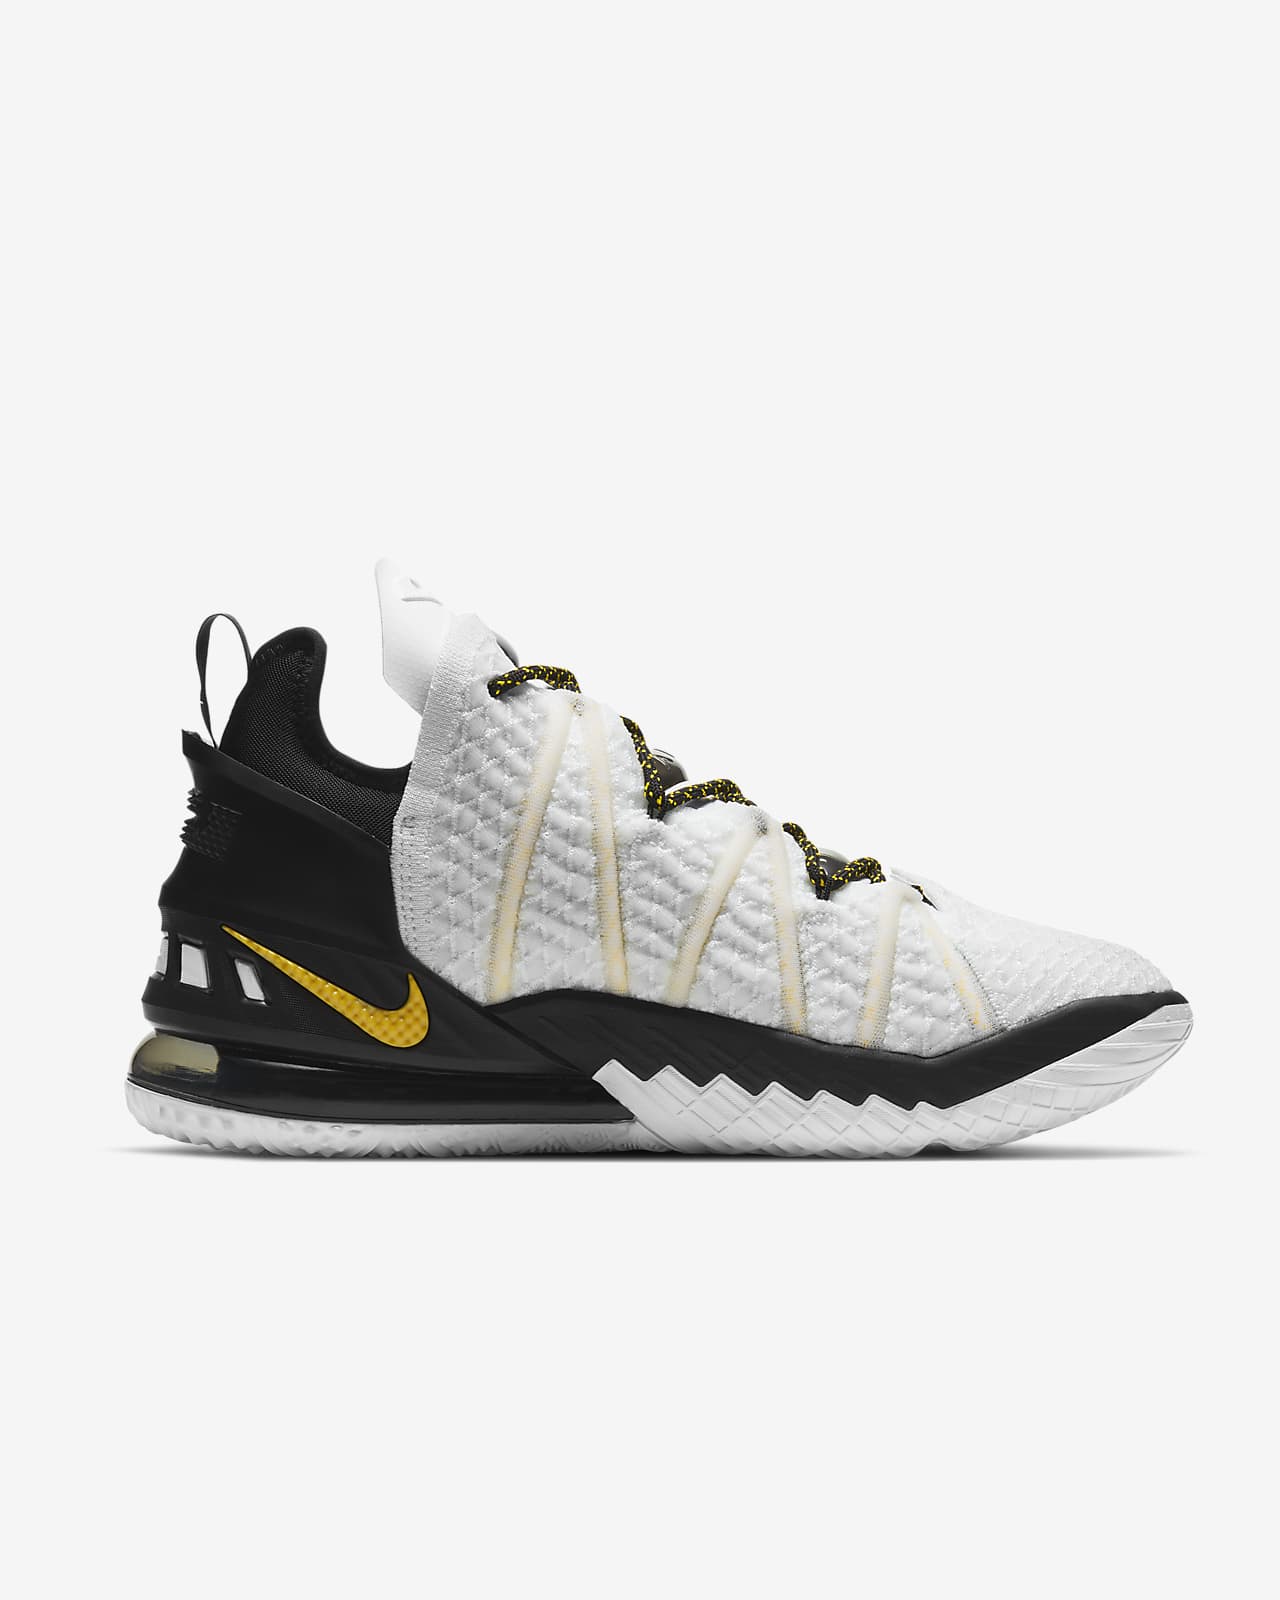 lebron 18 low gold